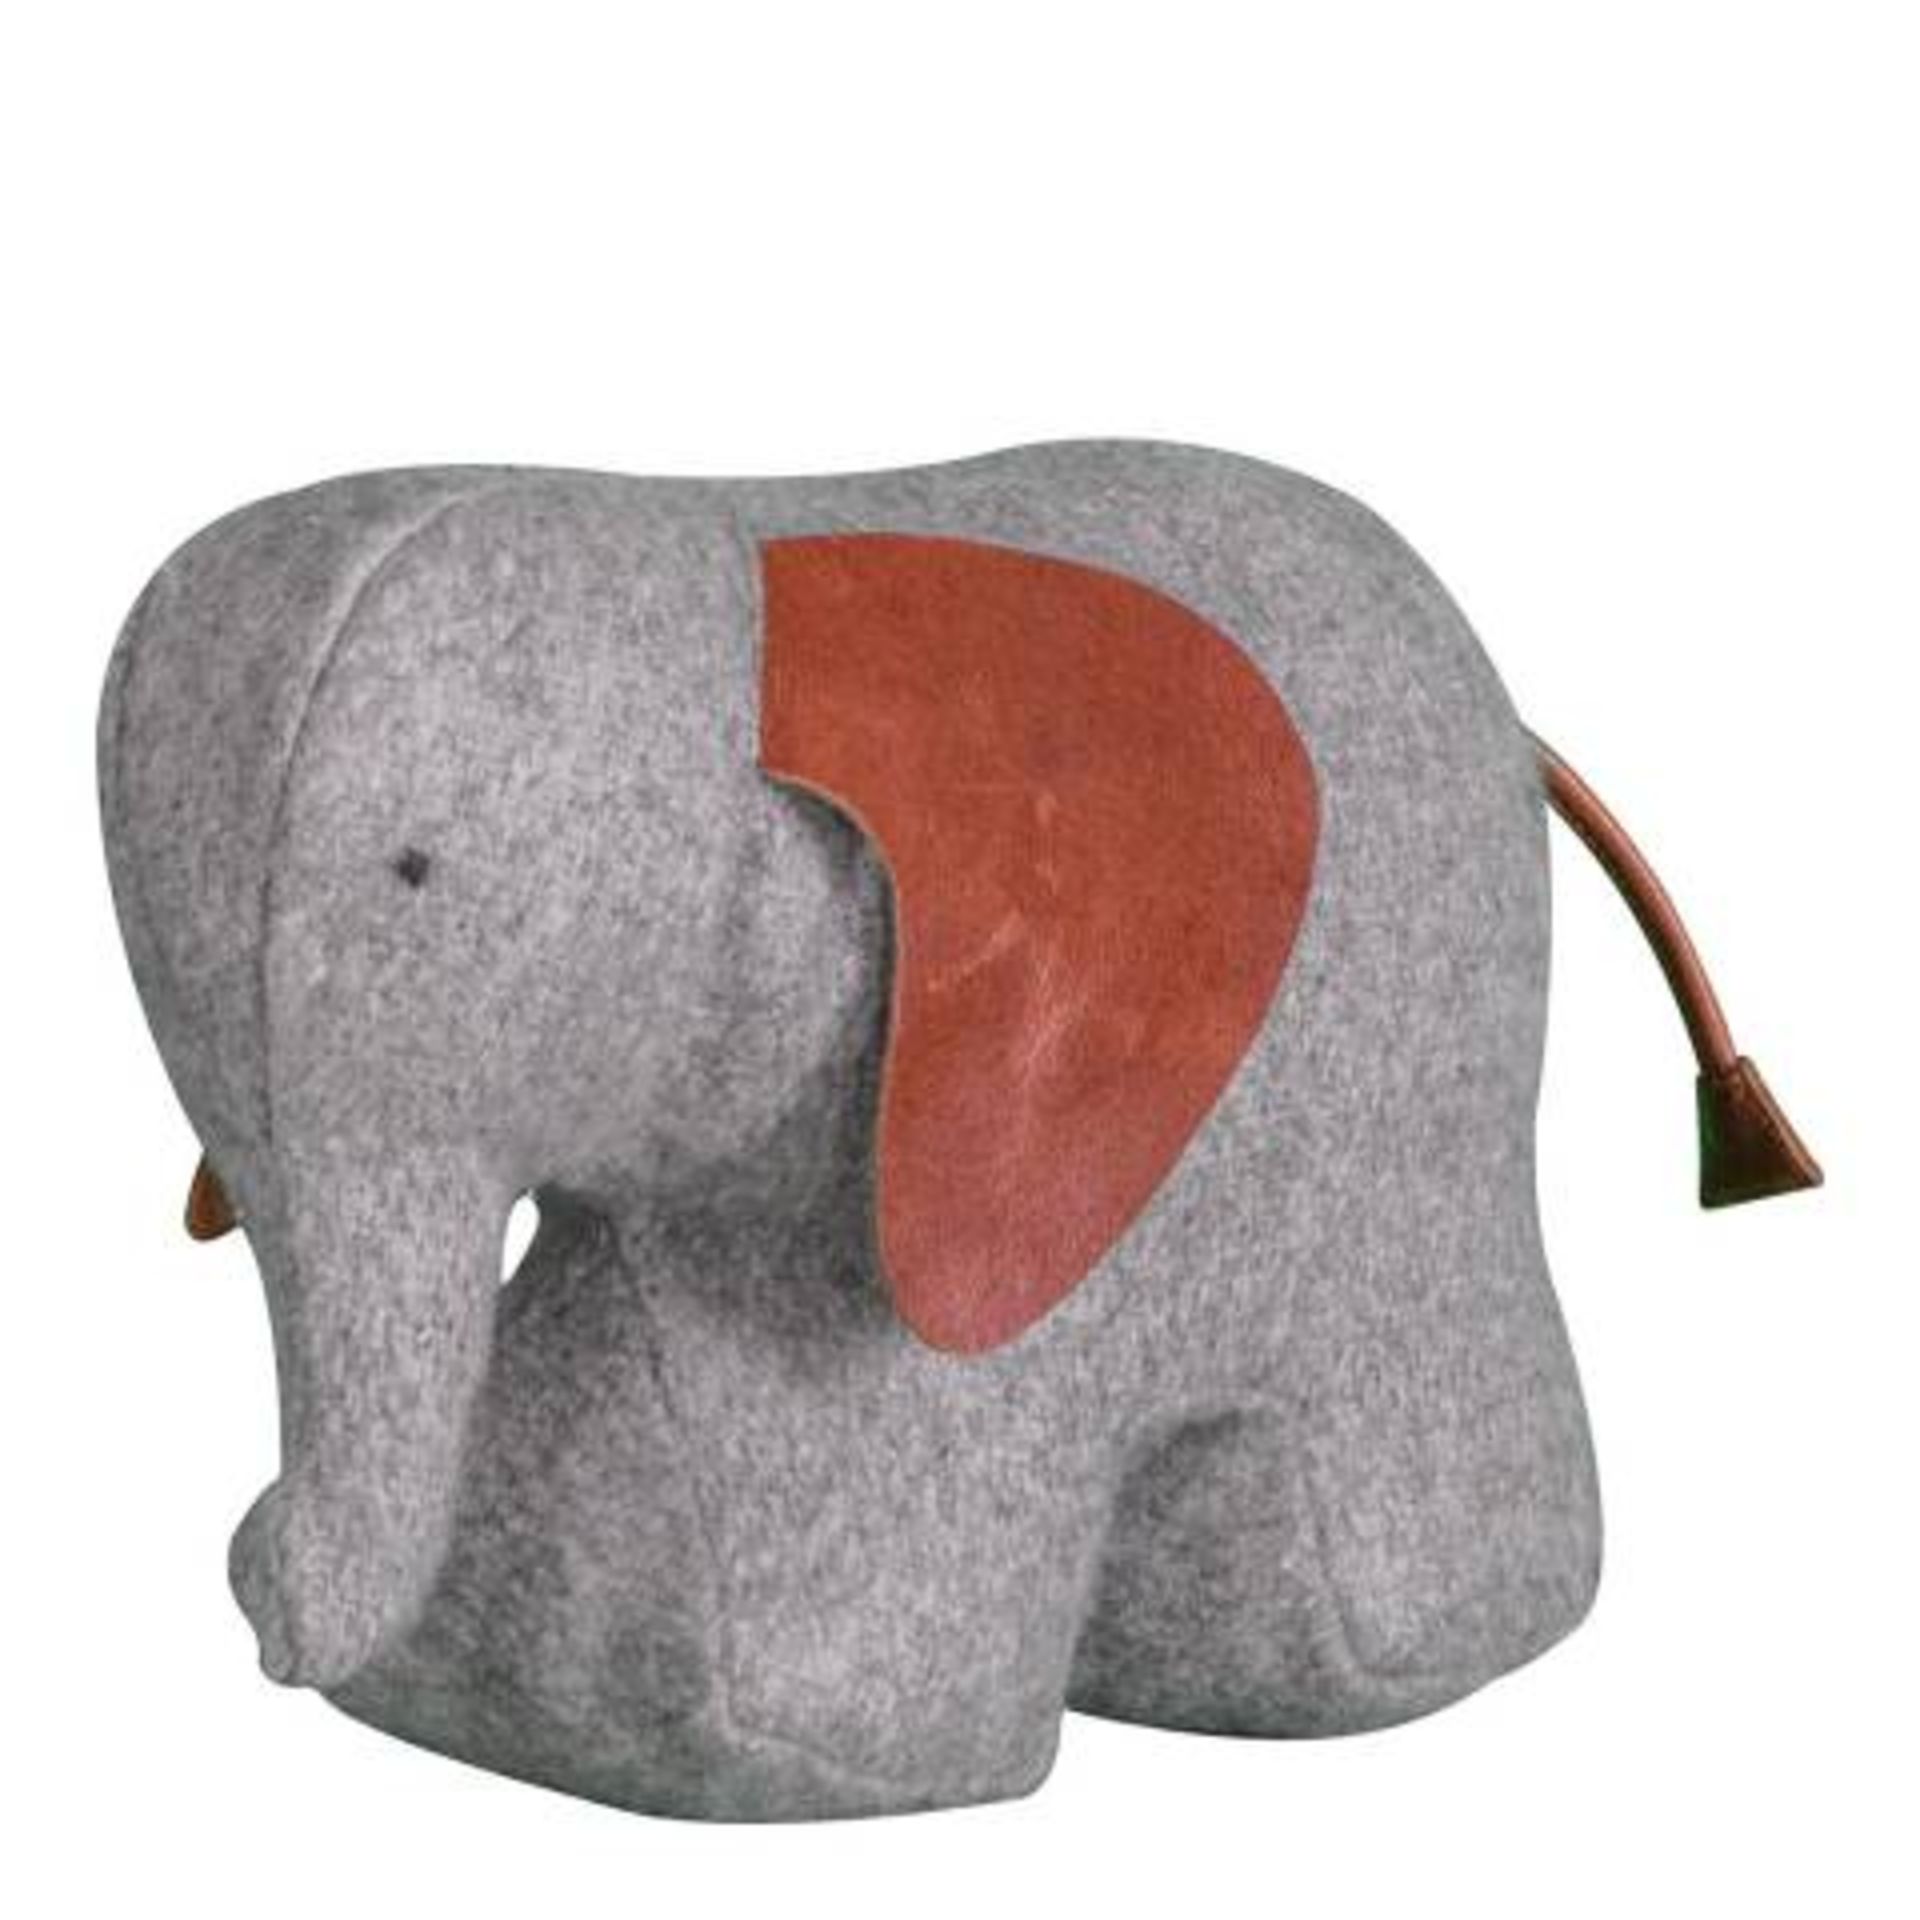 Ethan Elephant Doorstop Marmalade Design The Marmalade Designs collection offers a diverse range